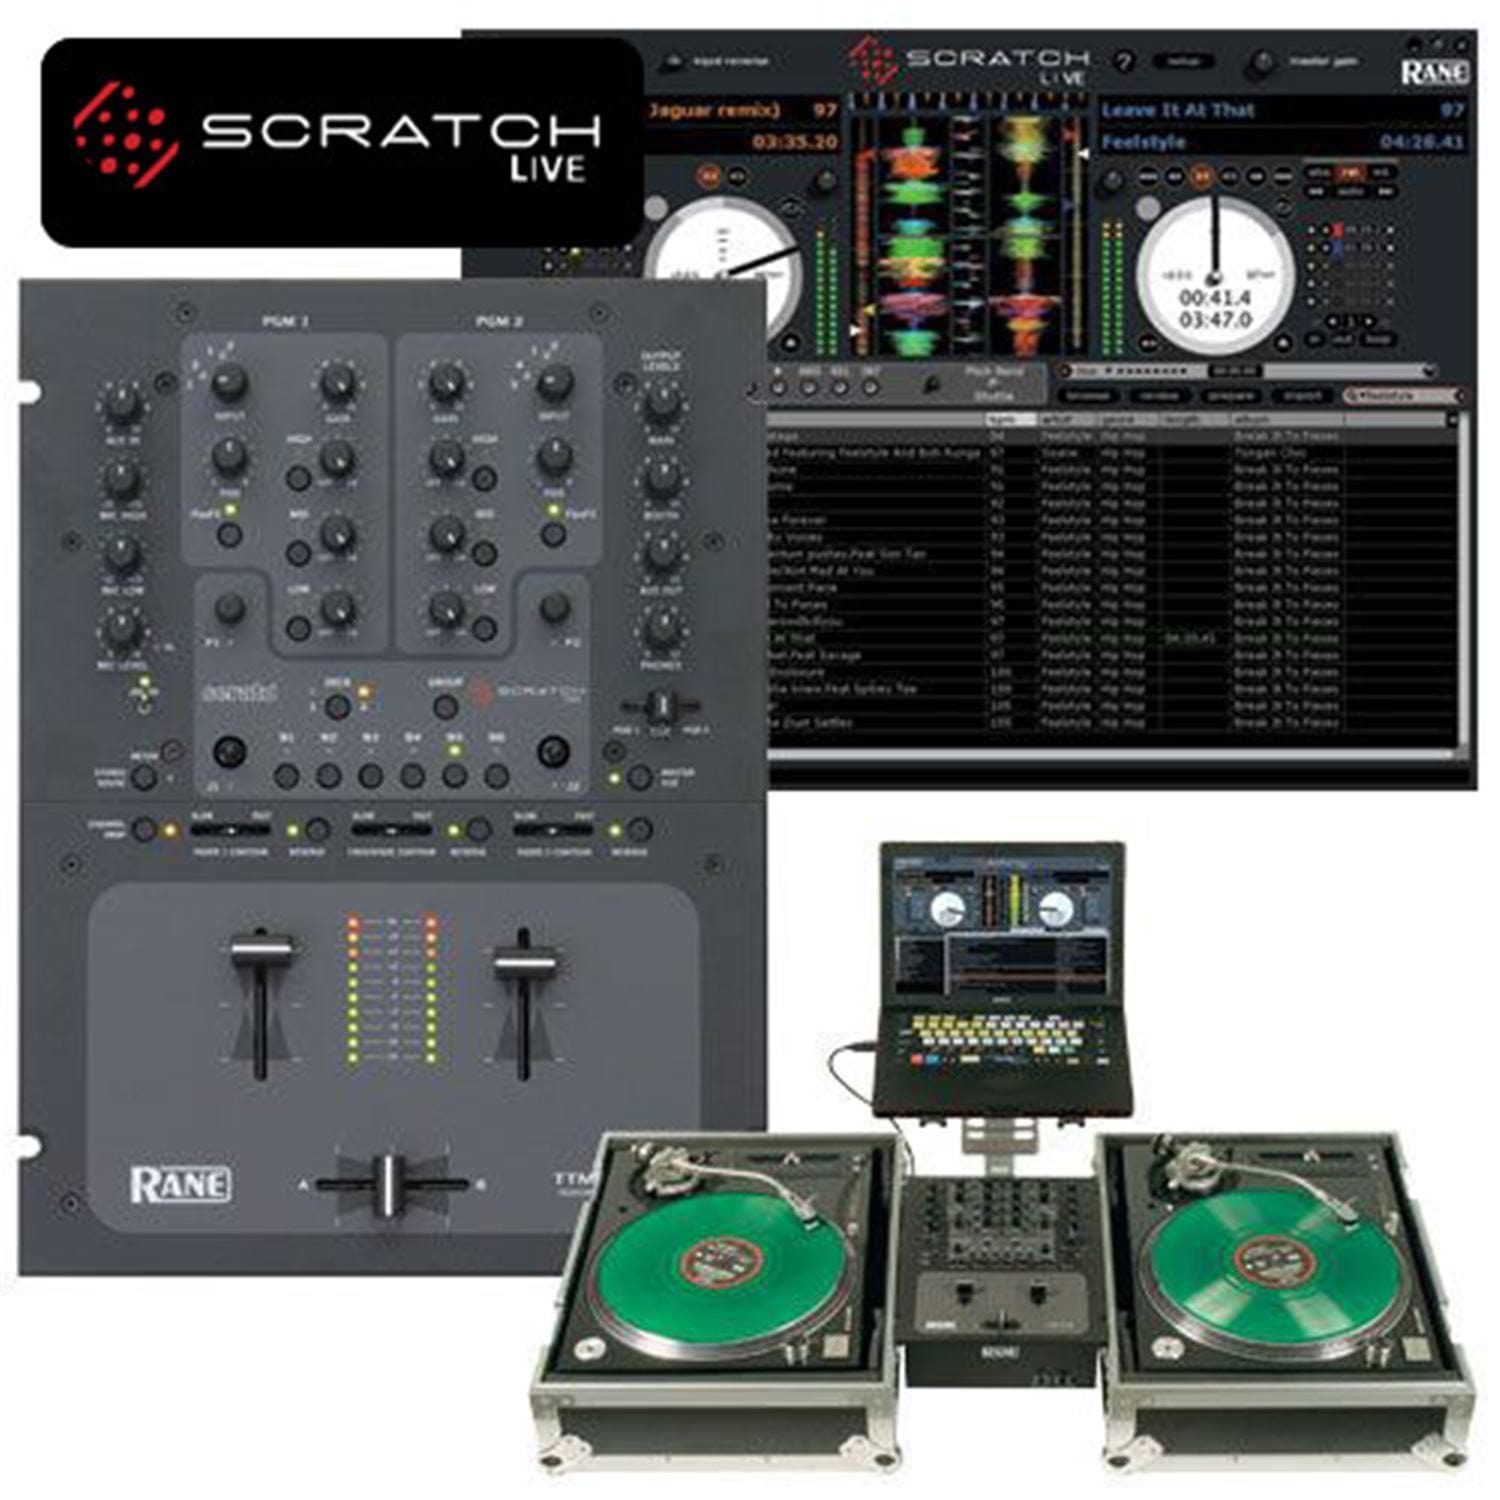 RANE TTM-57SL 2-Channel DJ Mixer with Scratch Live - PSSL ProSound and Stage Lighting